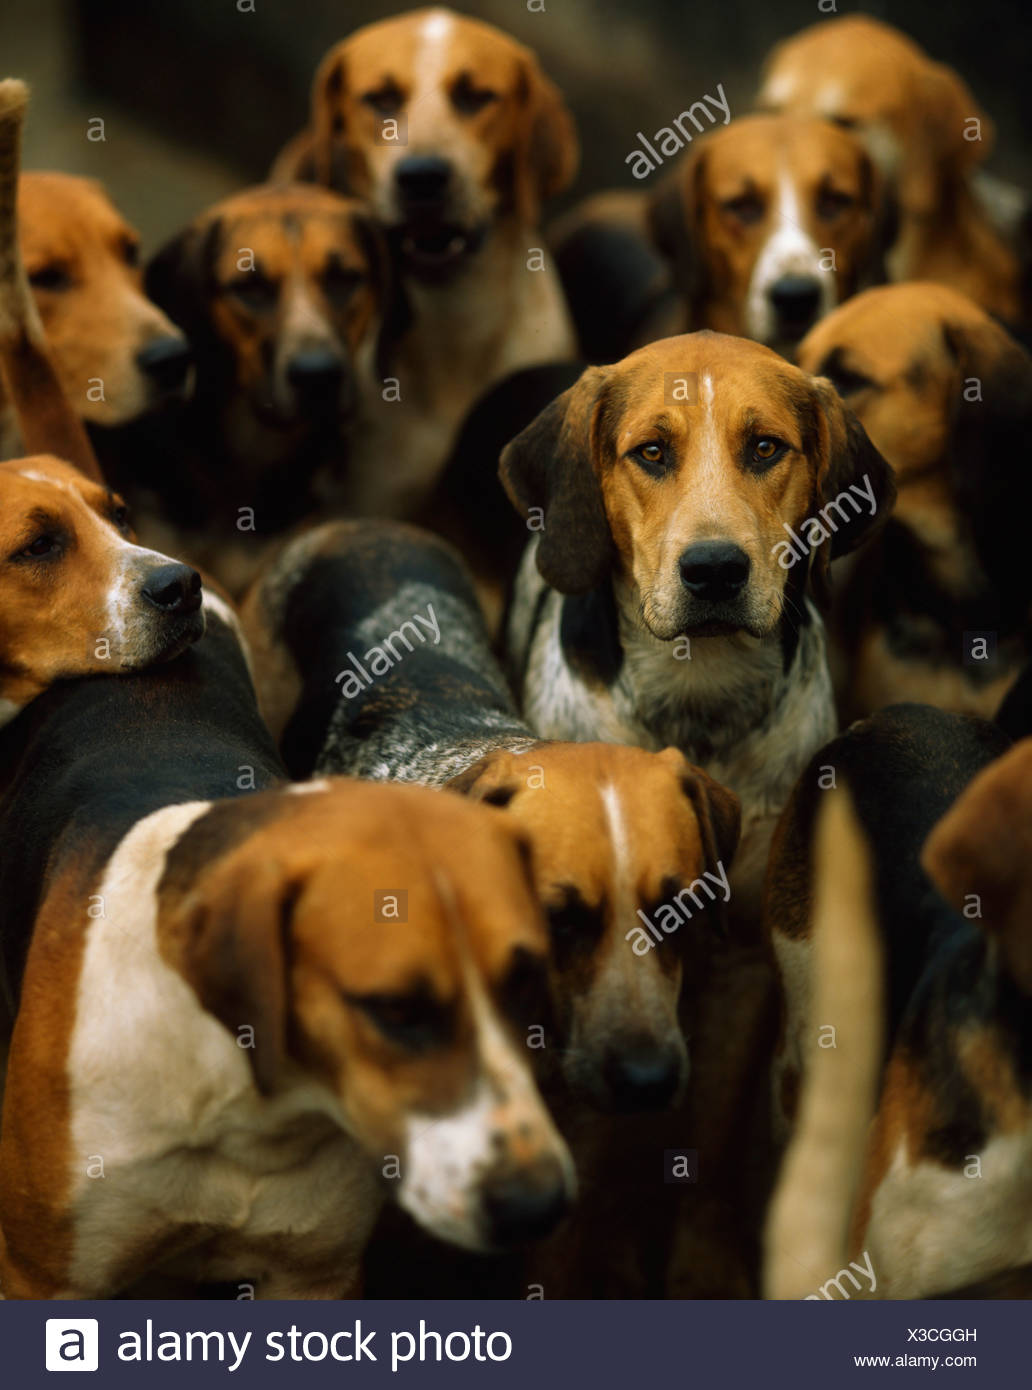 Groups Of Dogs Stock Photos Groups Of Dogs Stock Images Alamy